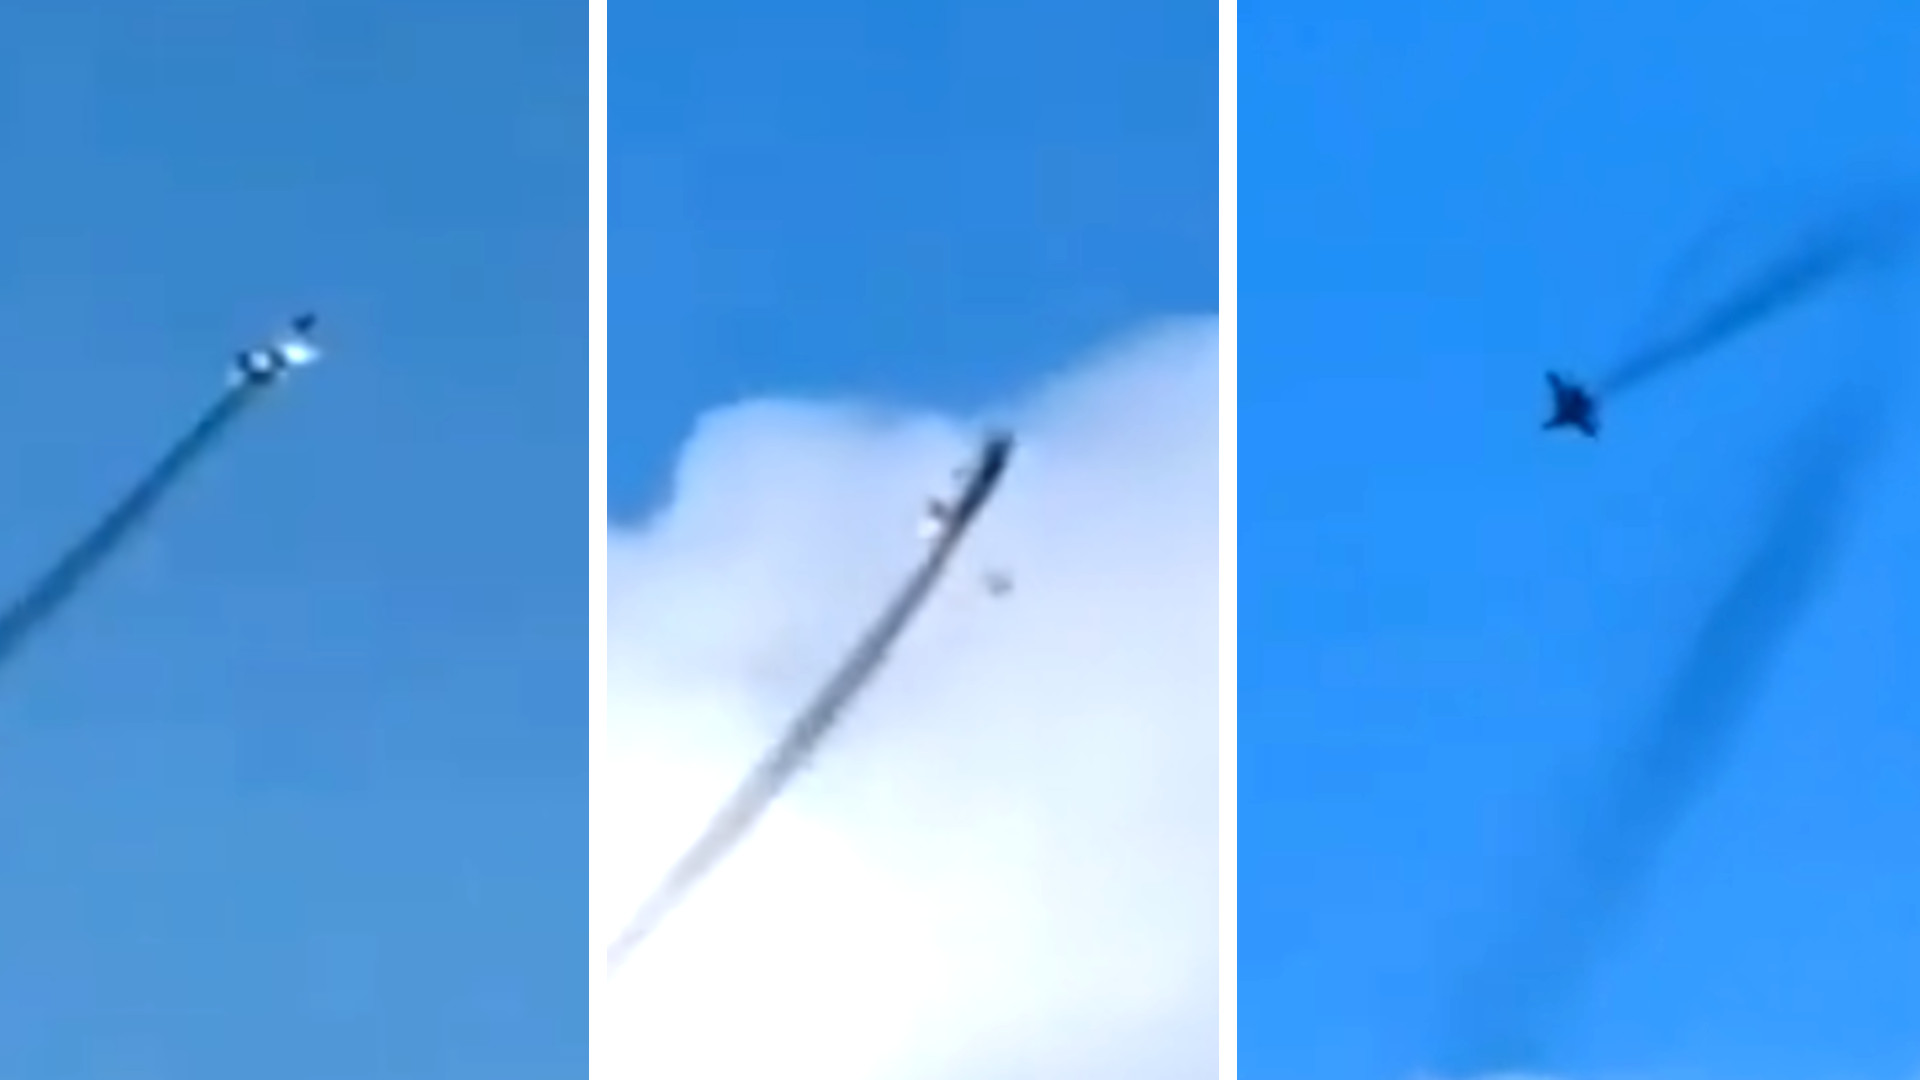 A video has emerged showing a Ukrainian MiG-29 toss-bombing a munition, a critical tactic that helps limit the exposure of the launching platform to enemy defenses.